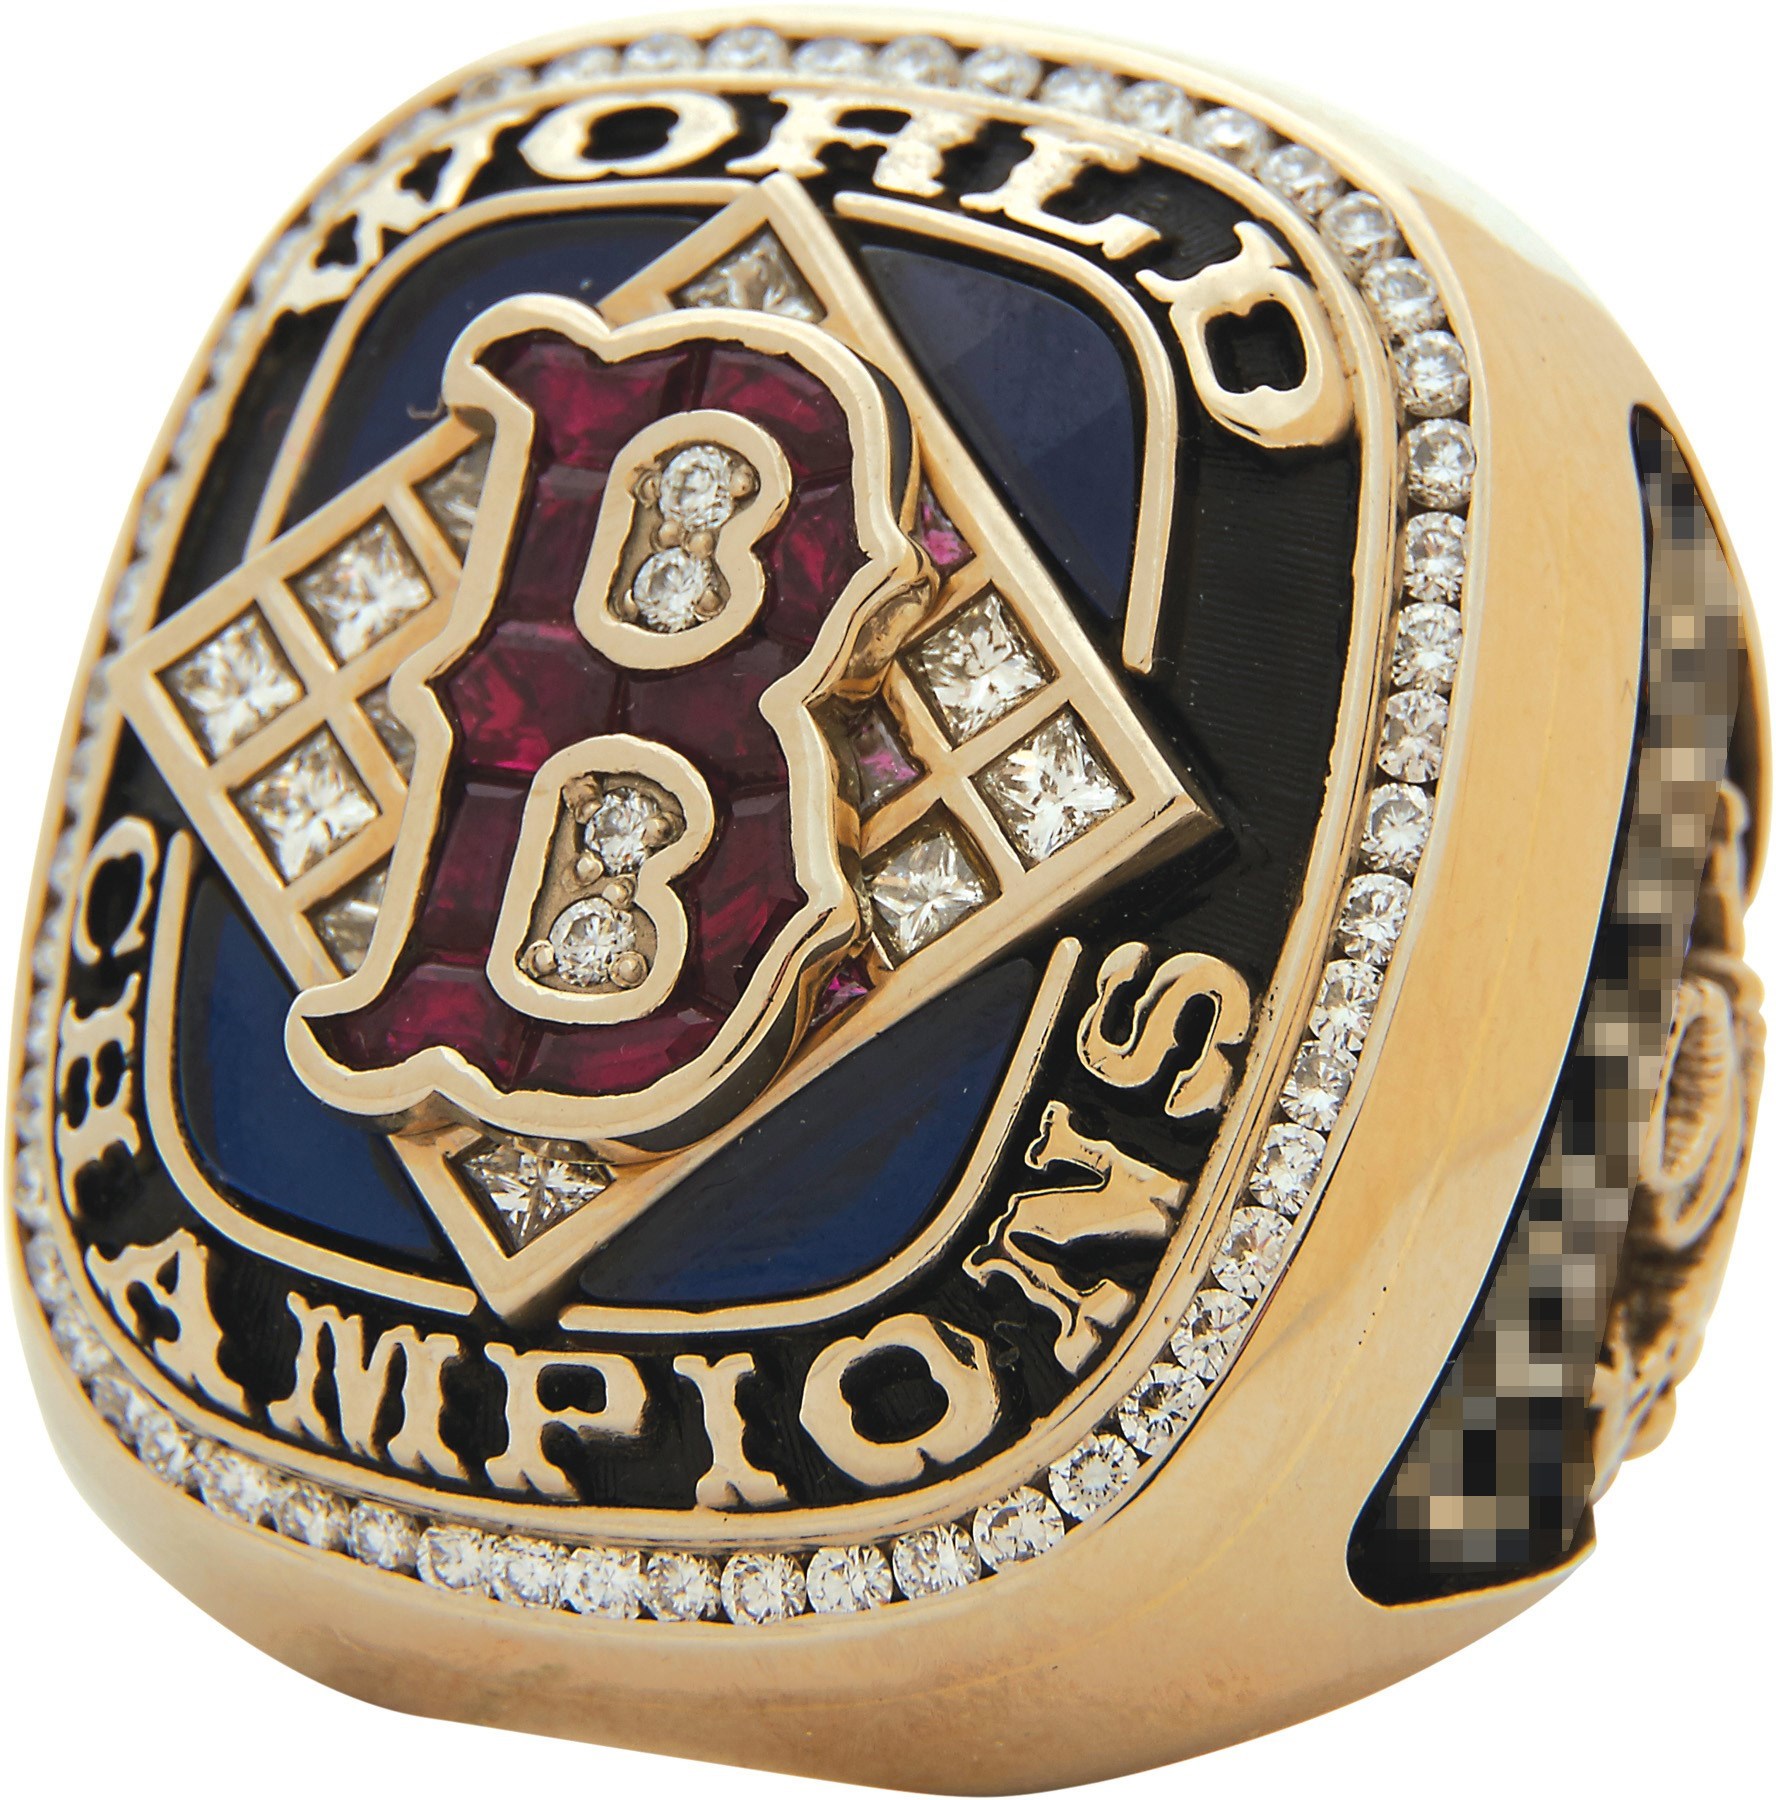 2004 Boston Red Sox "Reverse The Curse" World Series Championship Ring